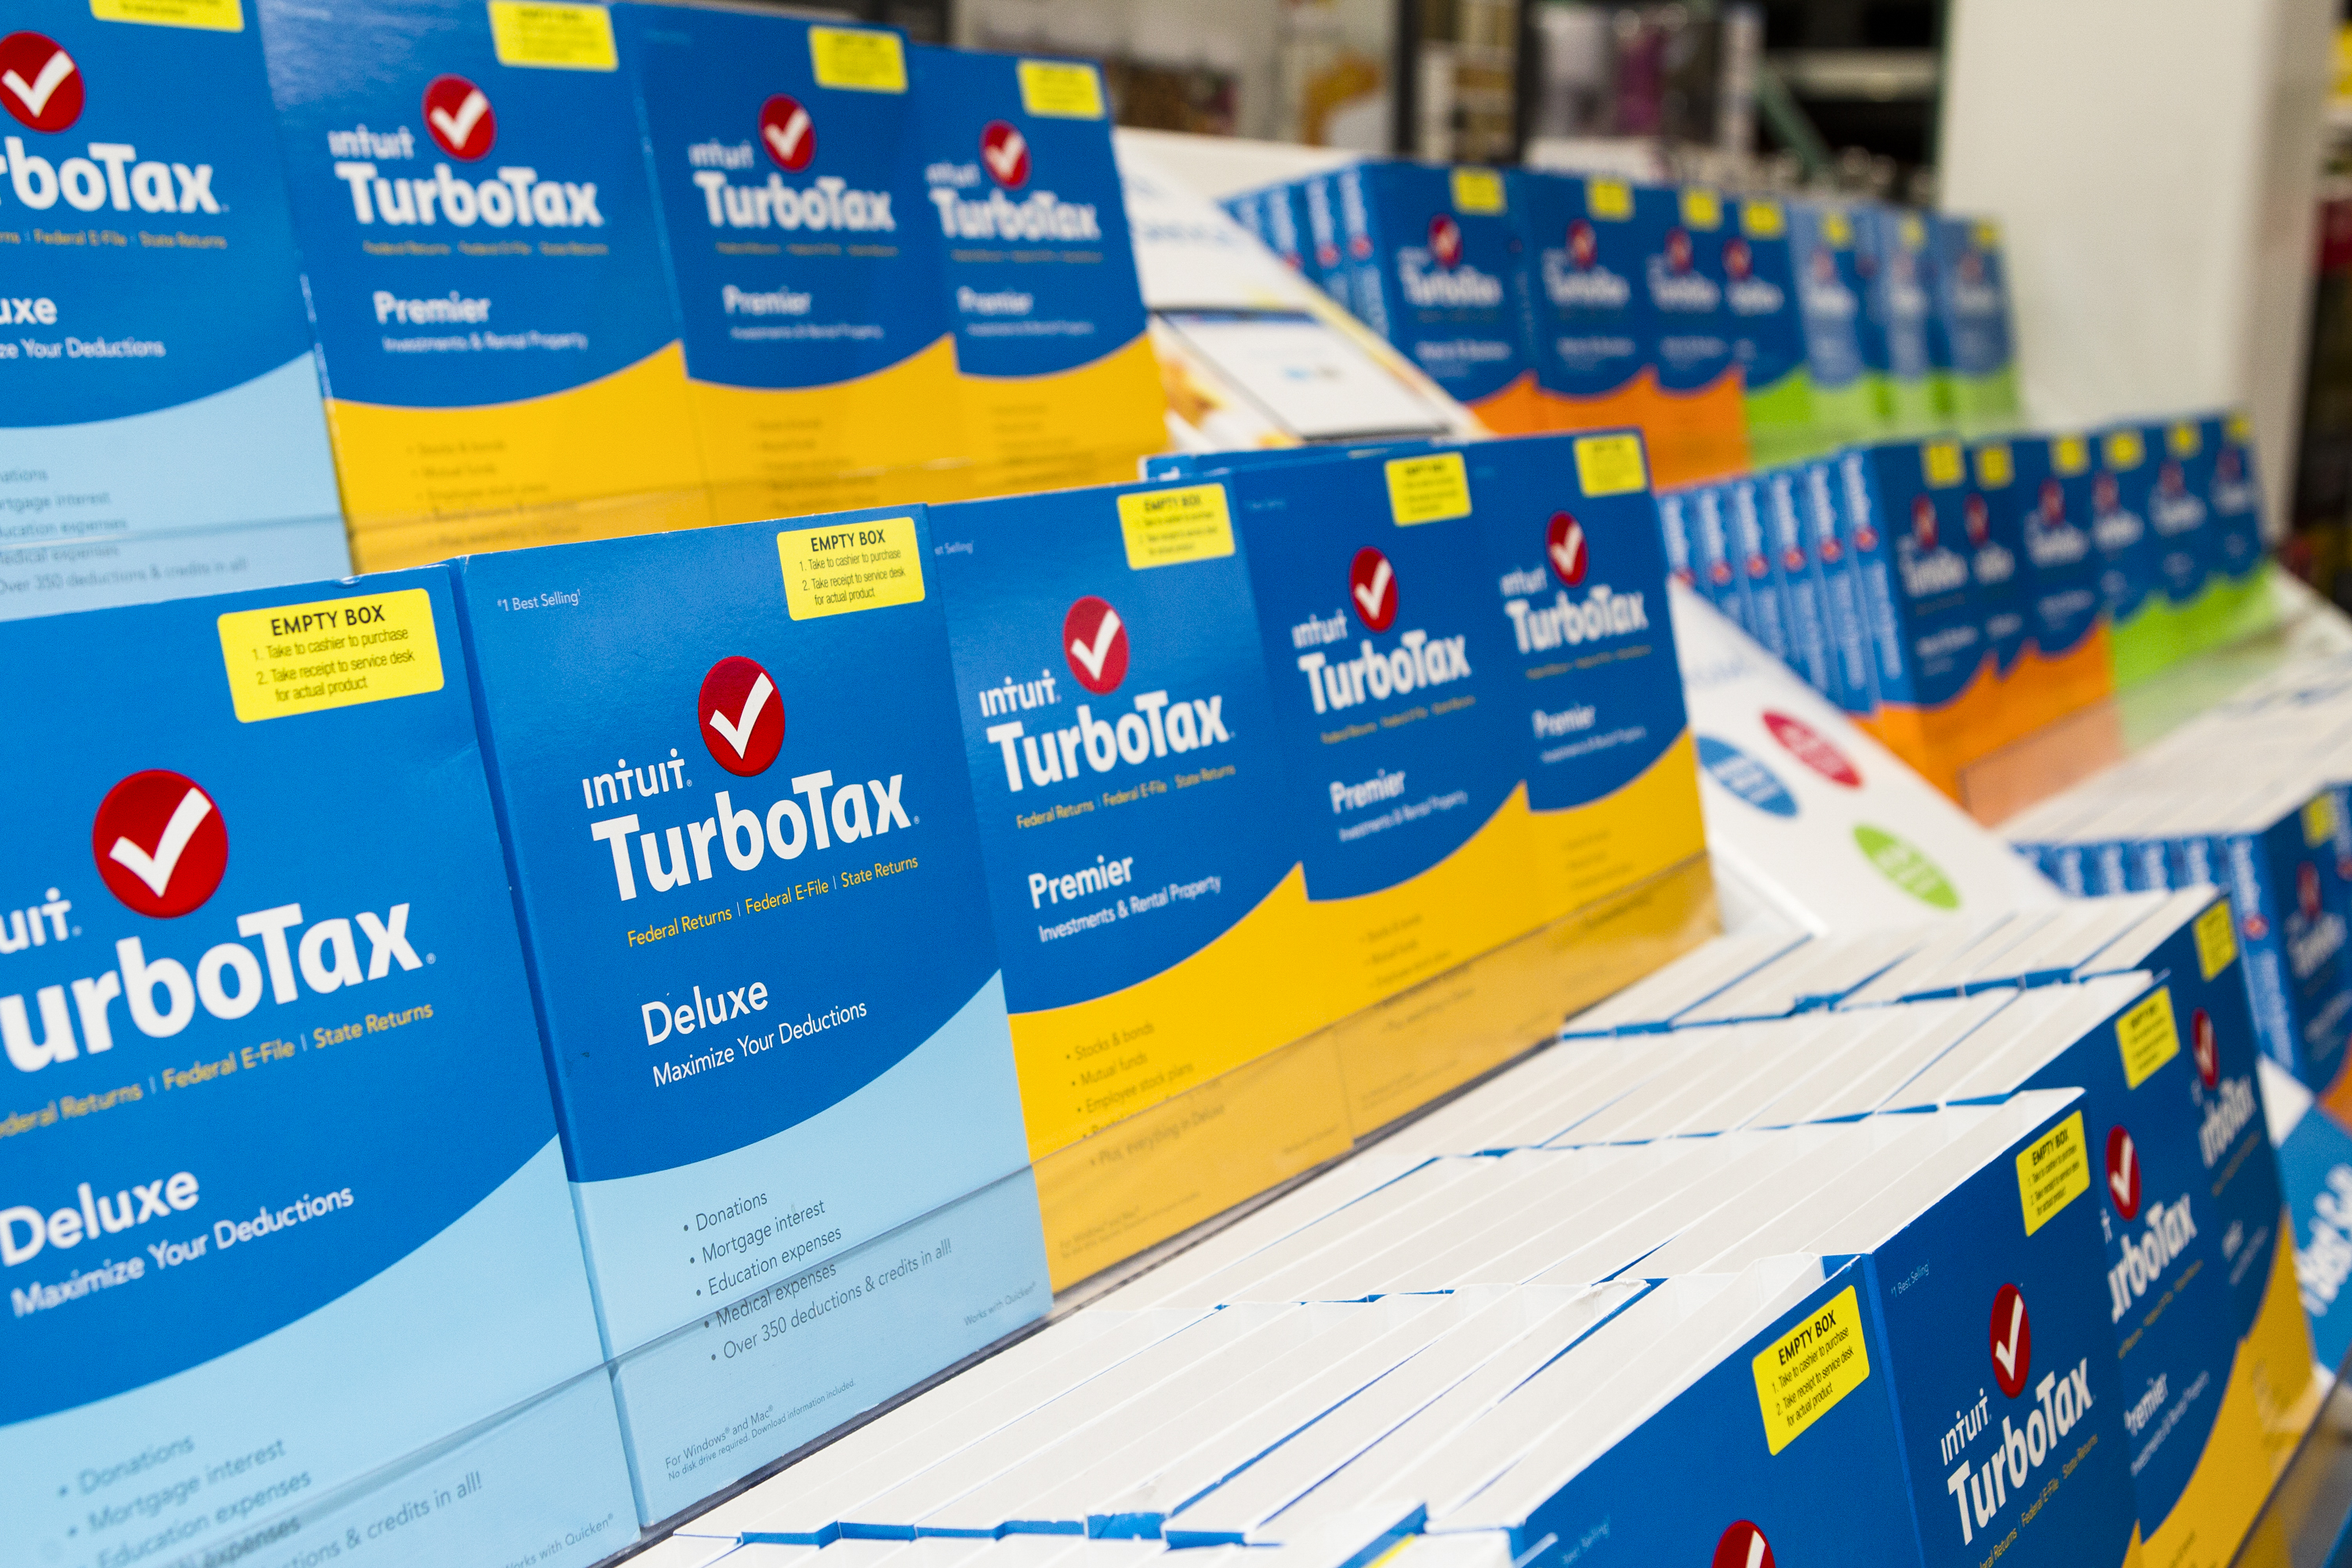 Best Deal On Turbotax 2021 TurboTax Cost: Best Deals on Tax Prep Software to File Taxes | Money